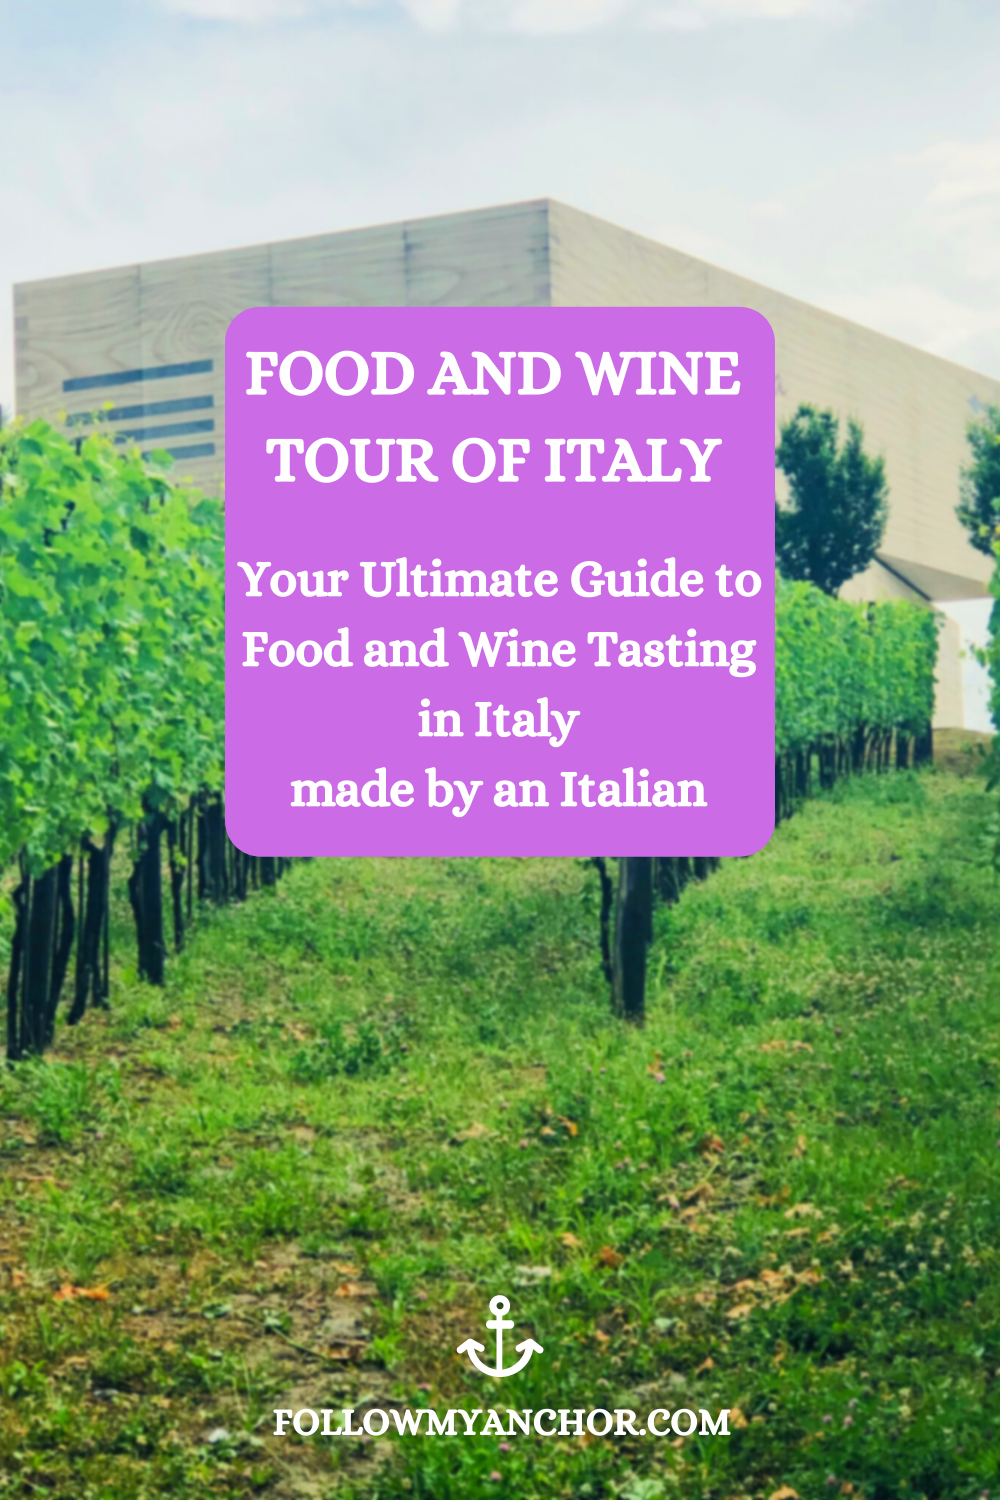 THE BEST FOOD AND WINE TOUR OF ITALY MADE BY AN ITALIAN